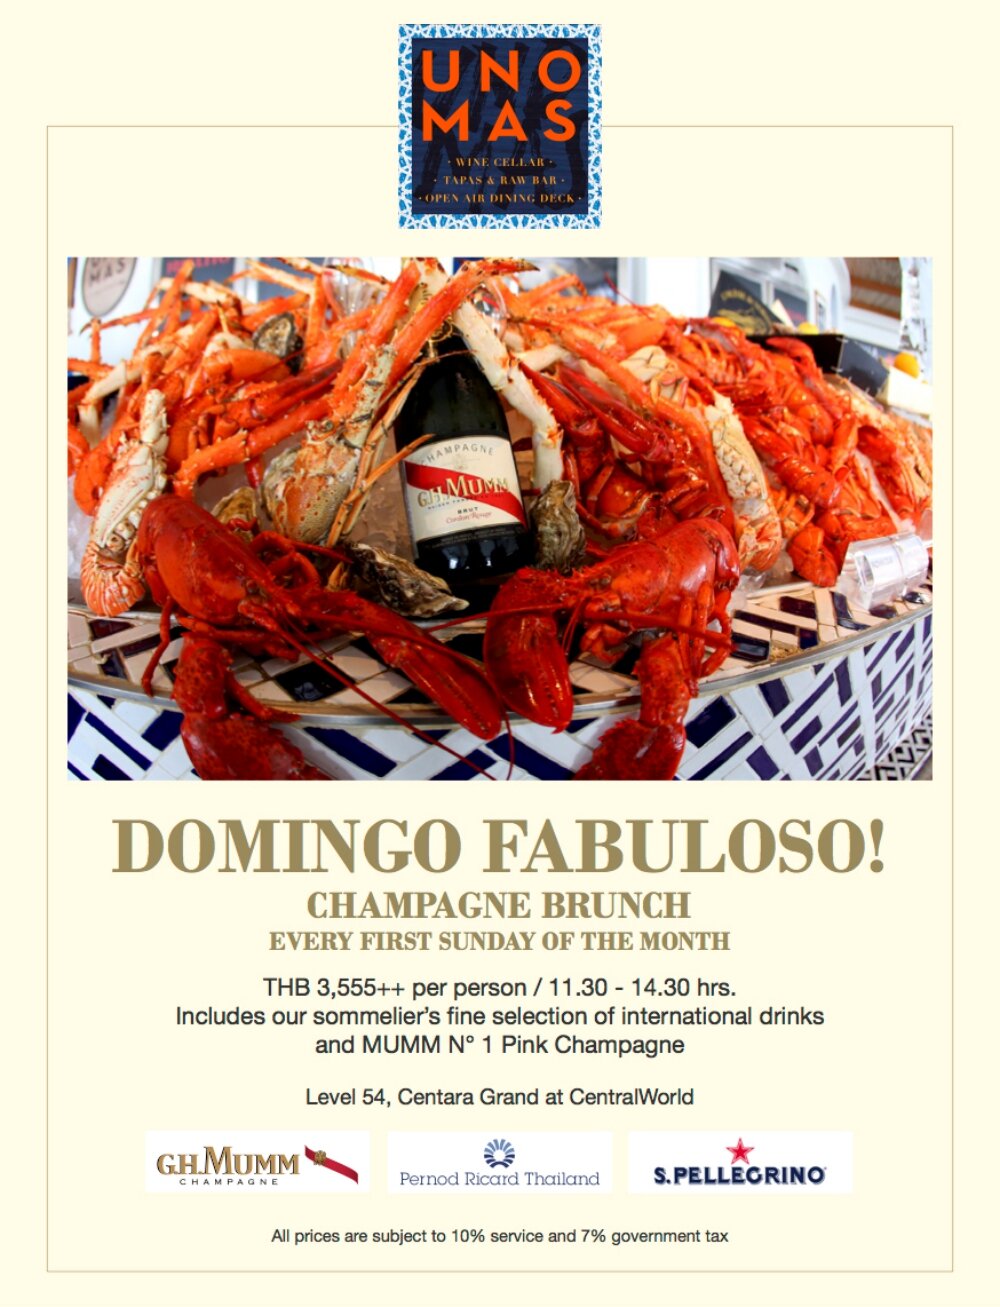 Champagne Brunch at Uno Mas